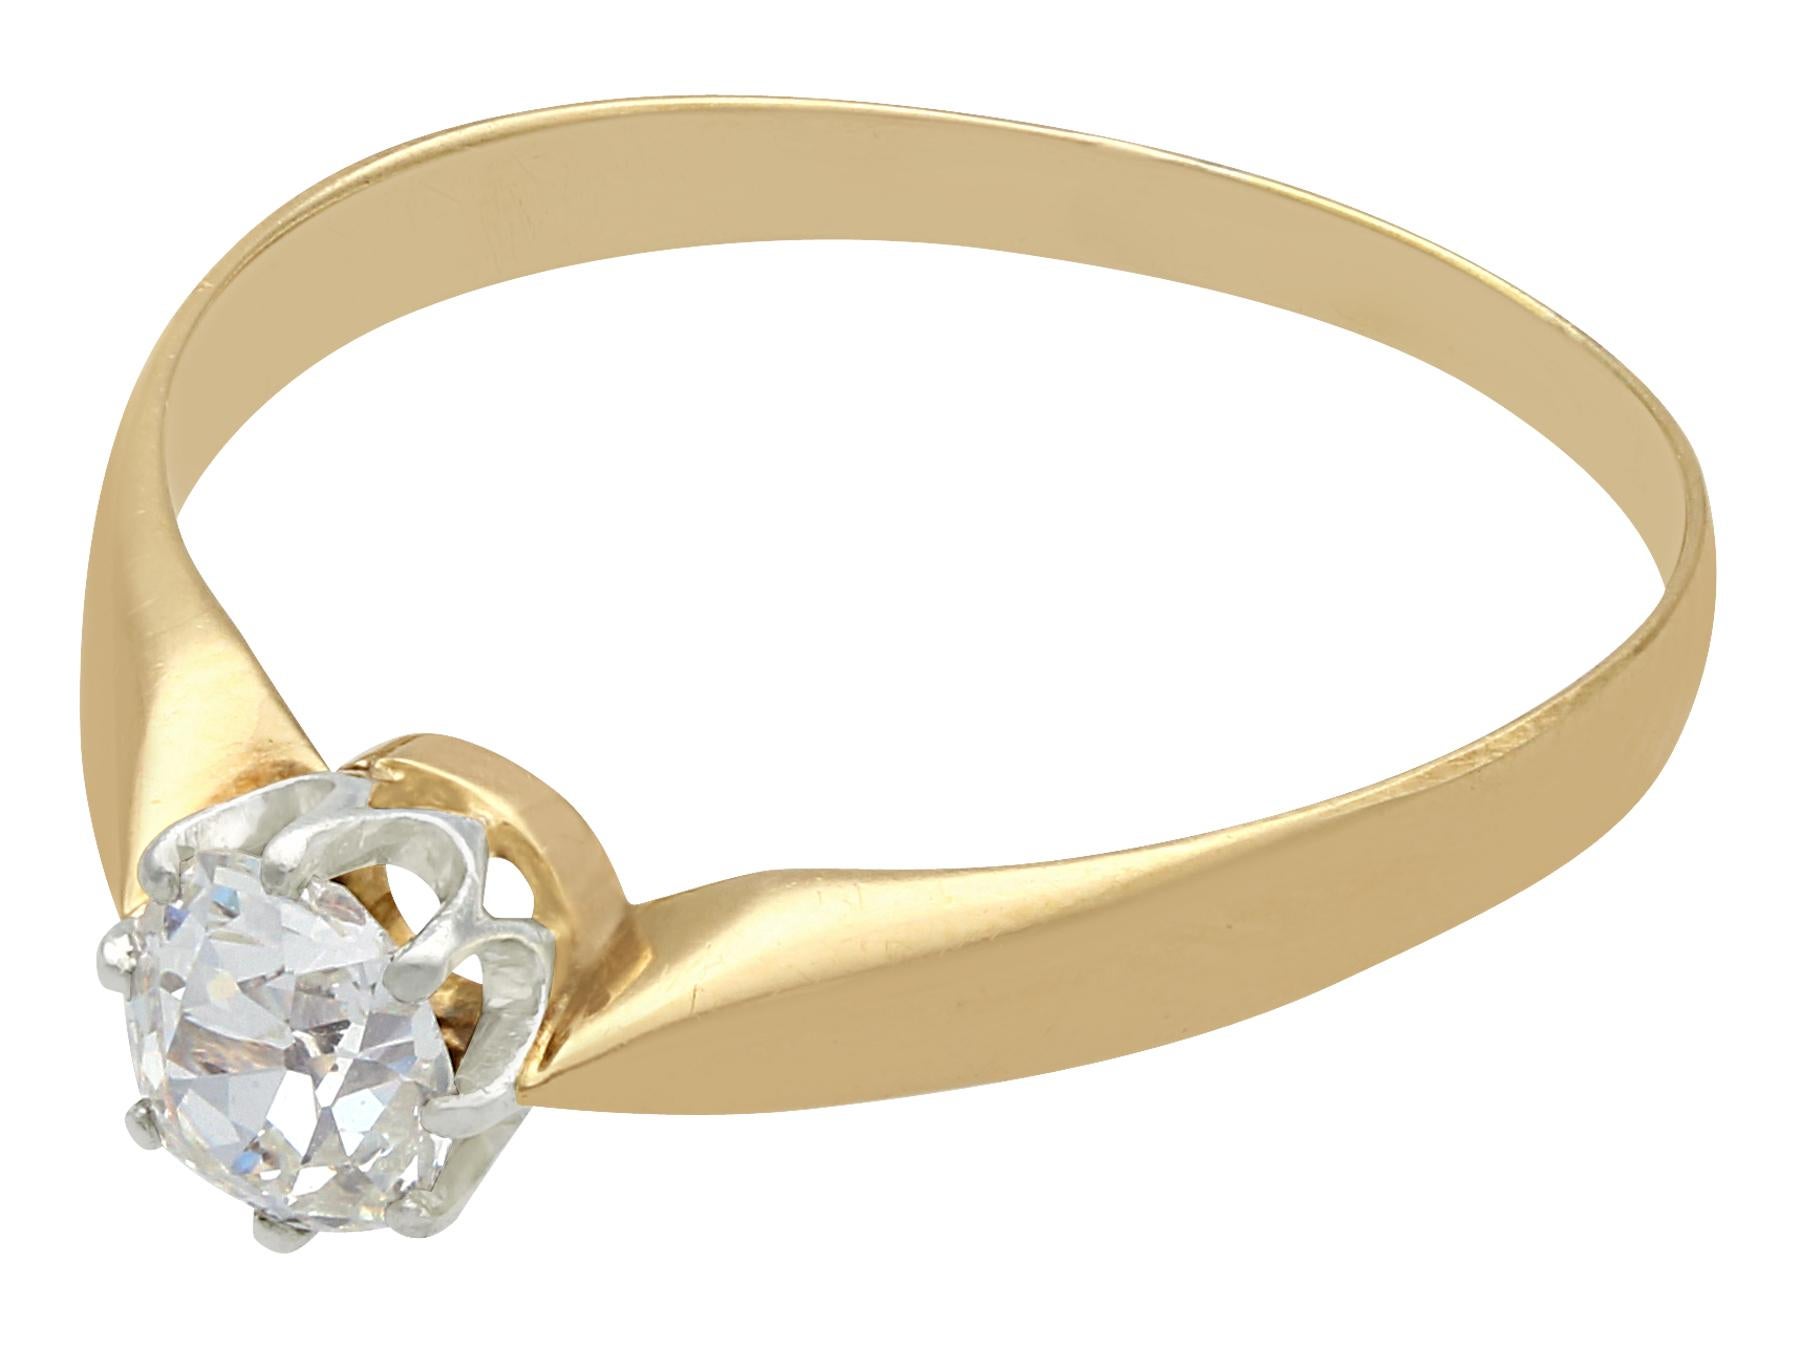 Antique Diamond and Yellow Gold Solitaire Ring In Excellent Condition For Sale In Jesmond, Newcastle Upon Tyne